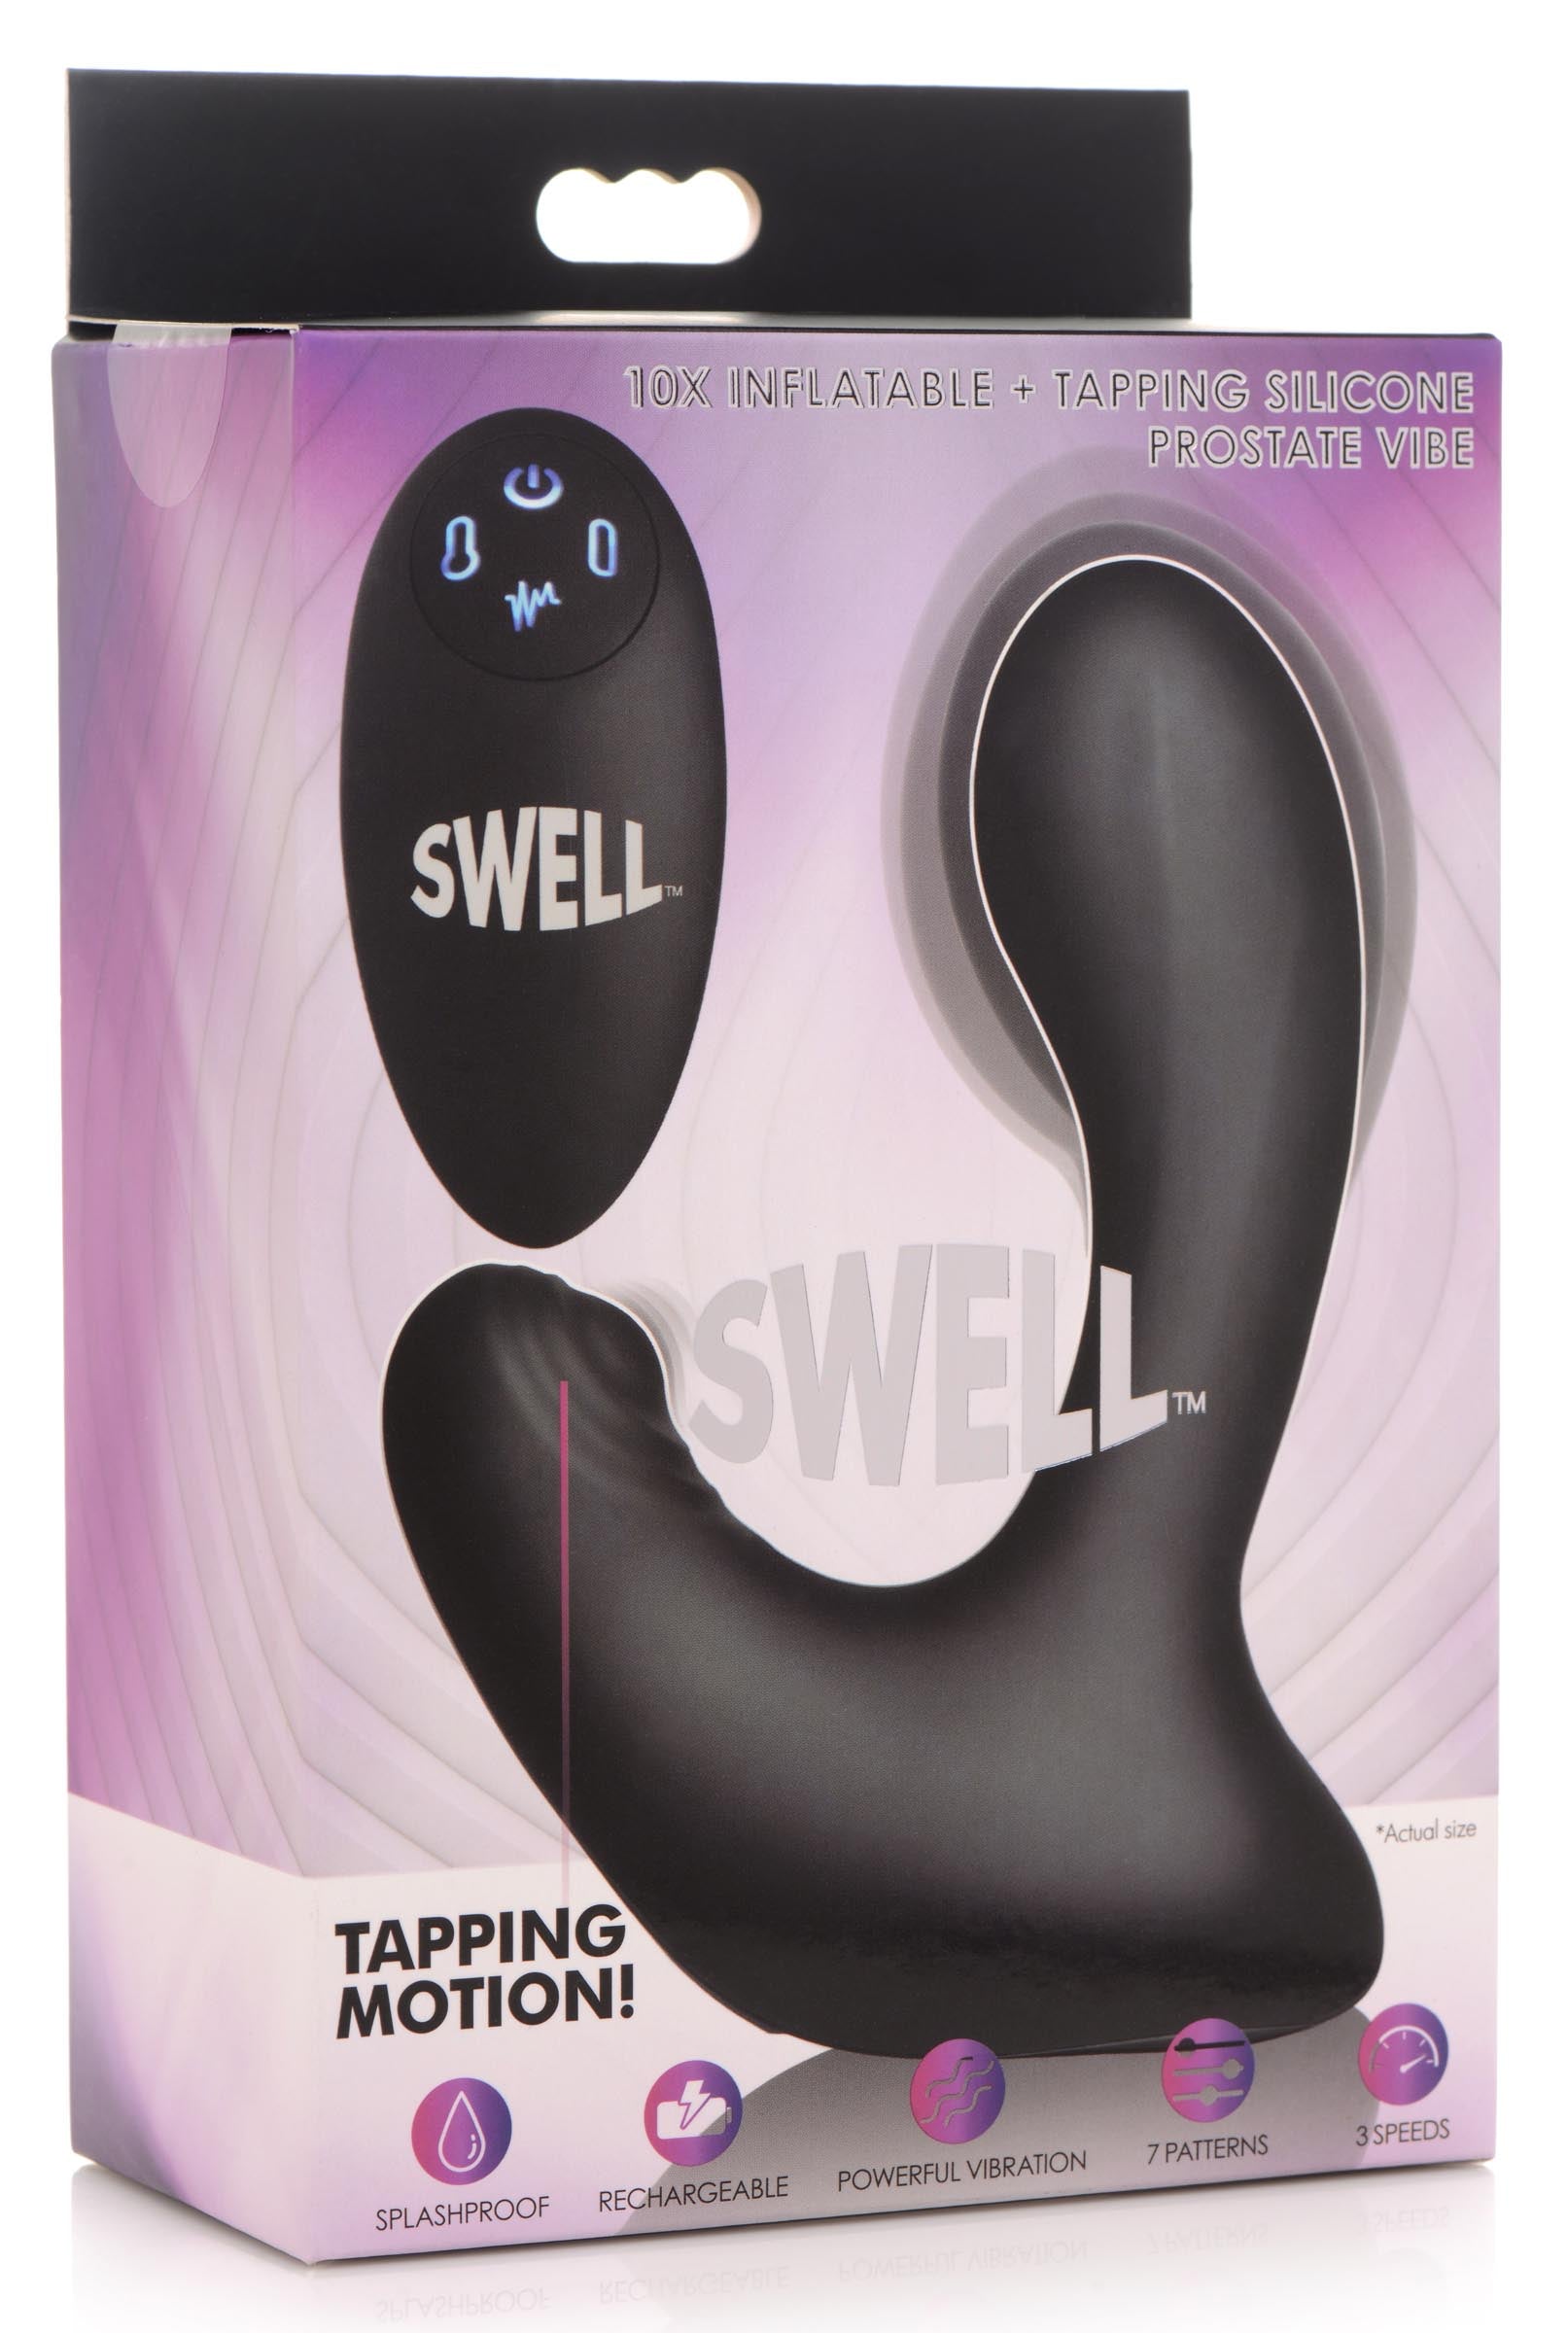 10X Inflatable and Tapping Silicone Prostate Vibrator - UABDSM